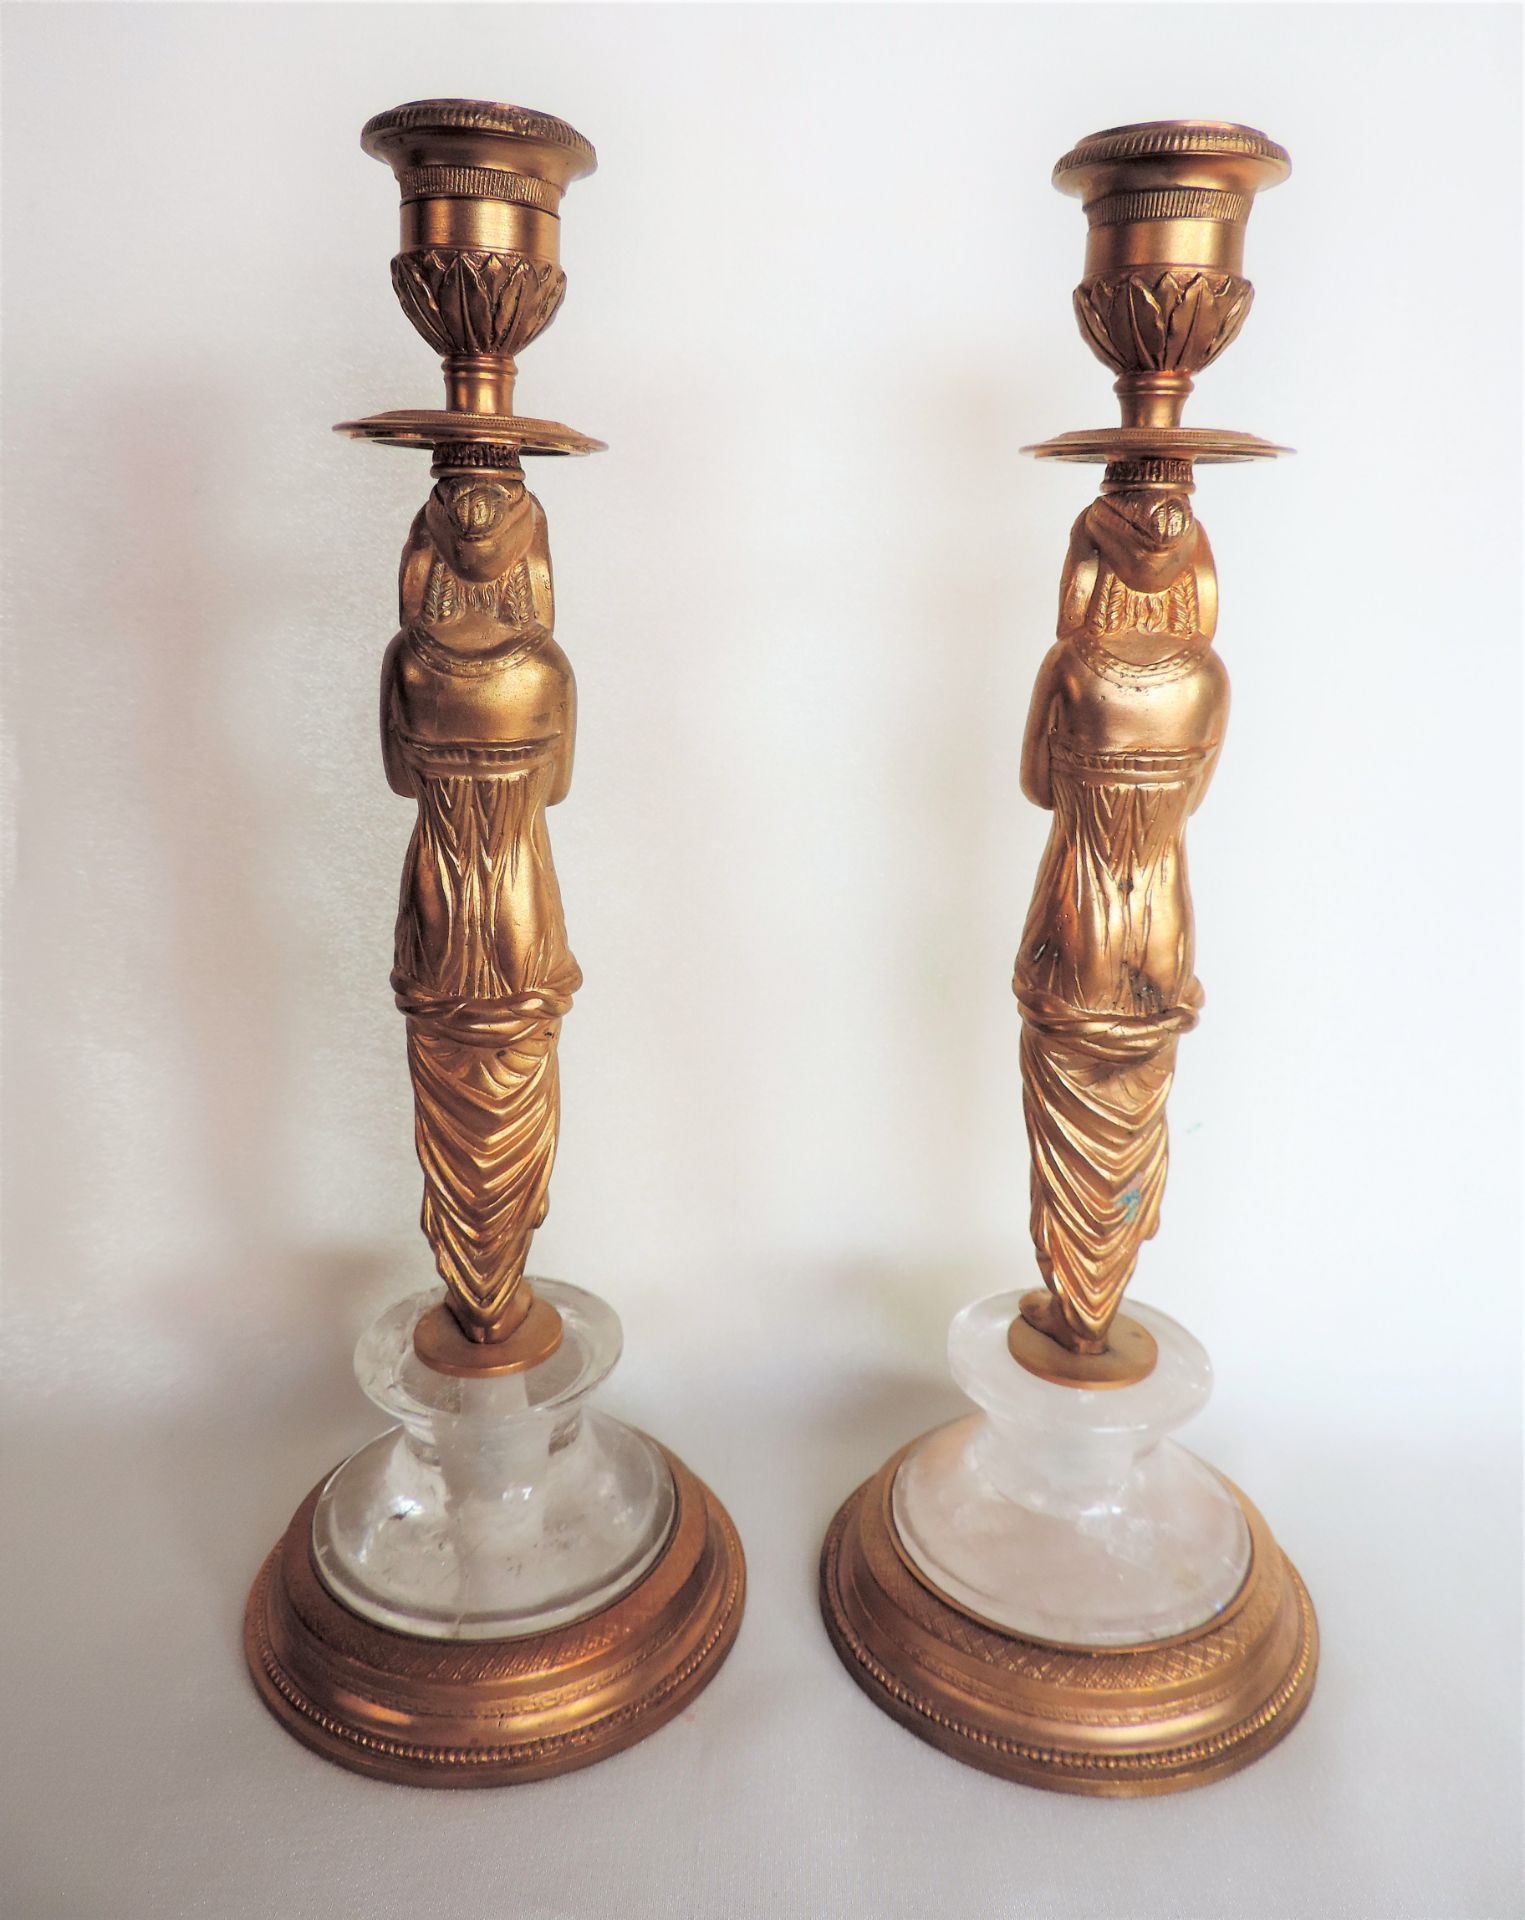 Pair Antique Gilt Egyptian Revival Candlesticks - Image 6 of 6